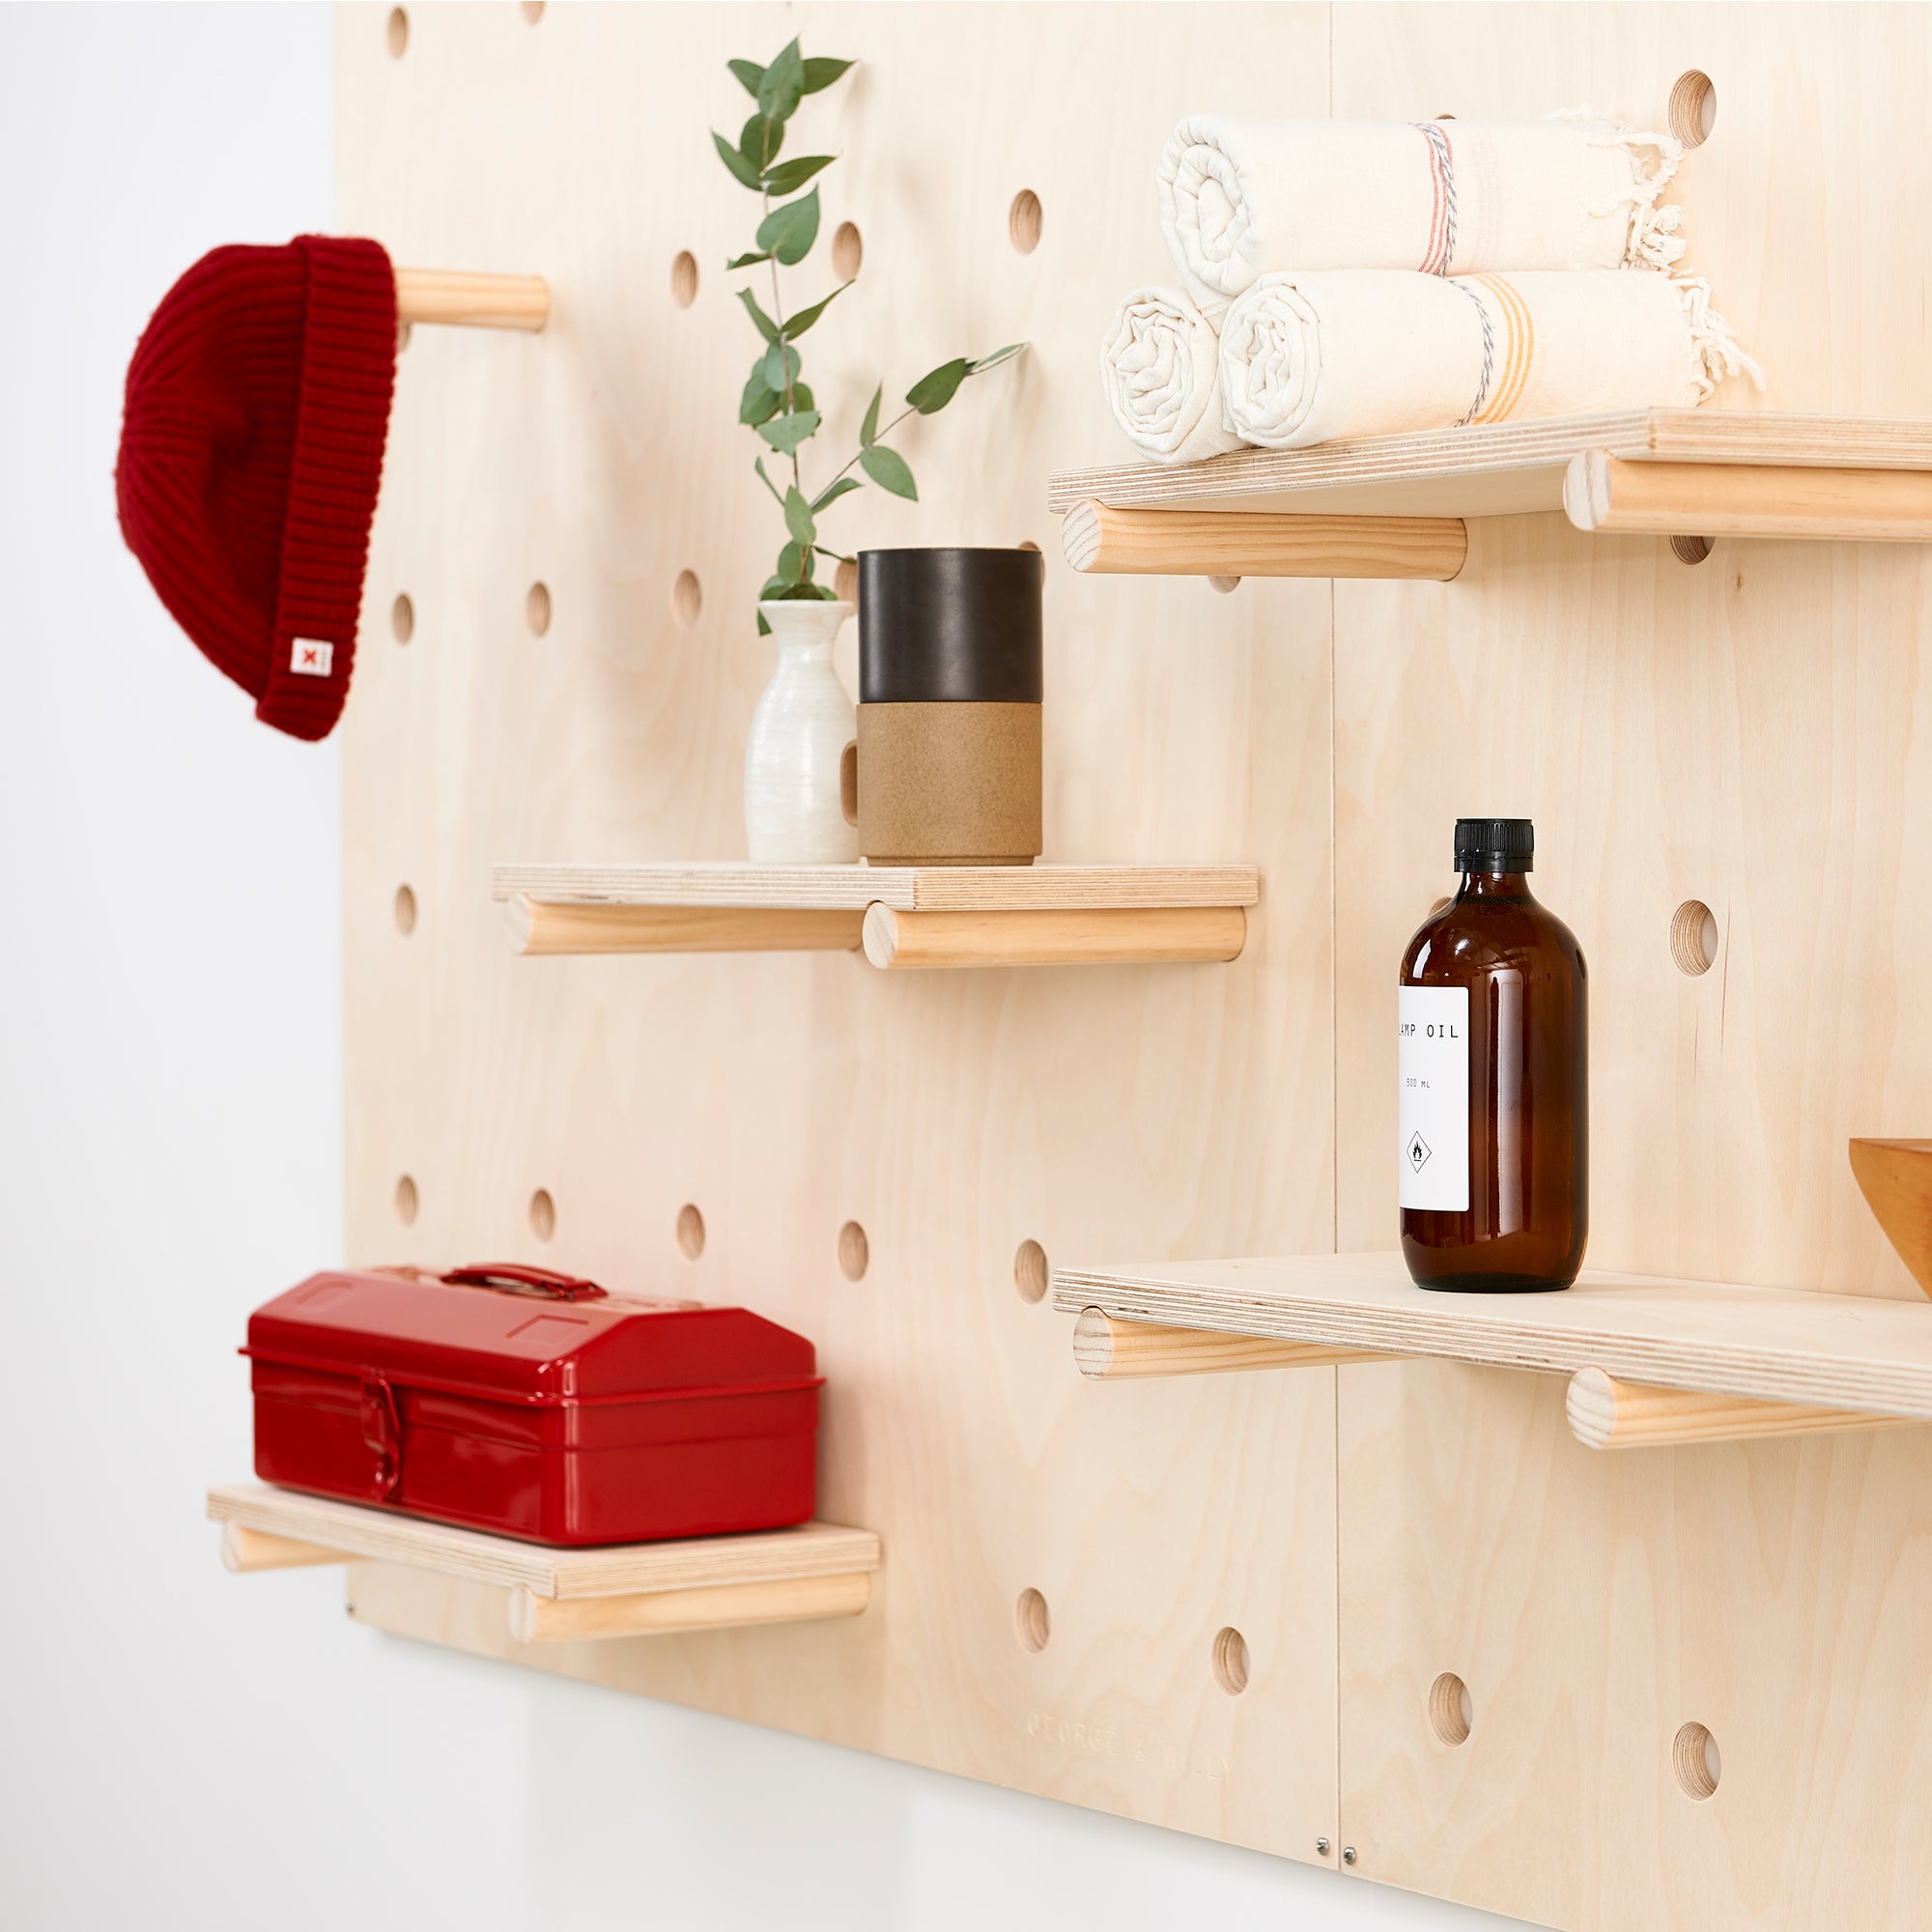 How to Install the Wooden Pegboard